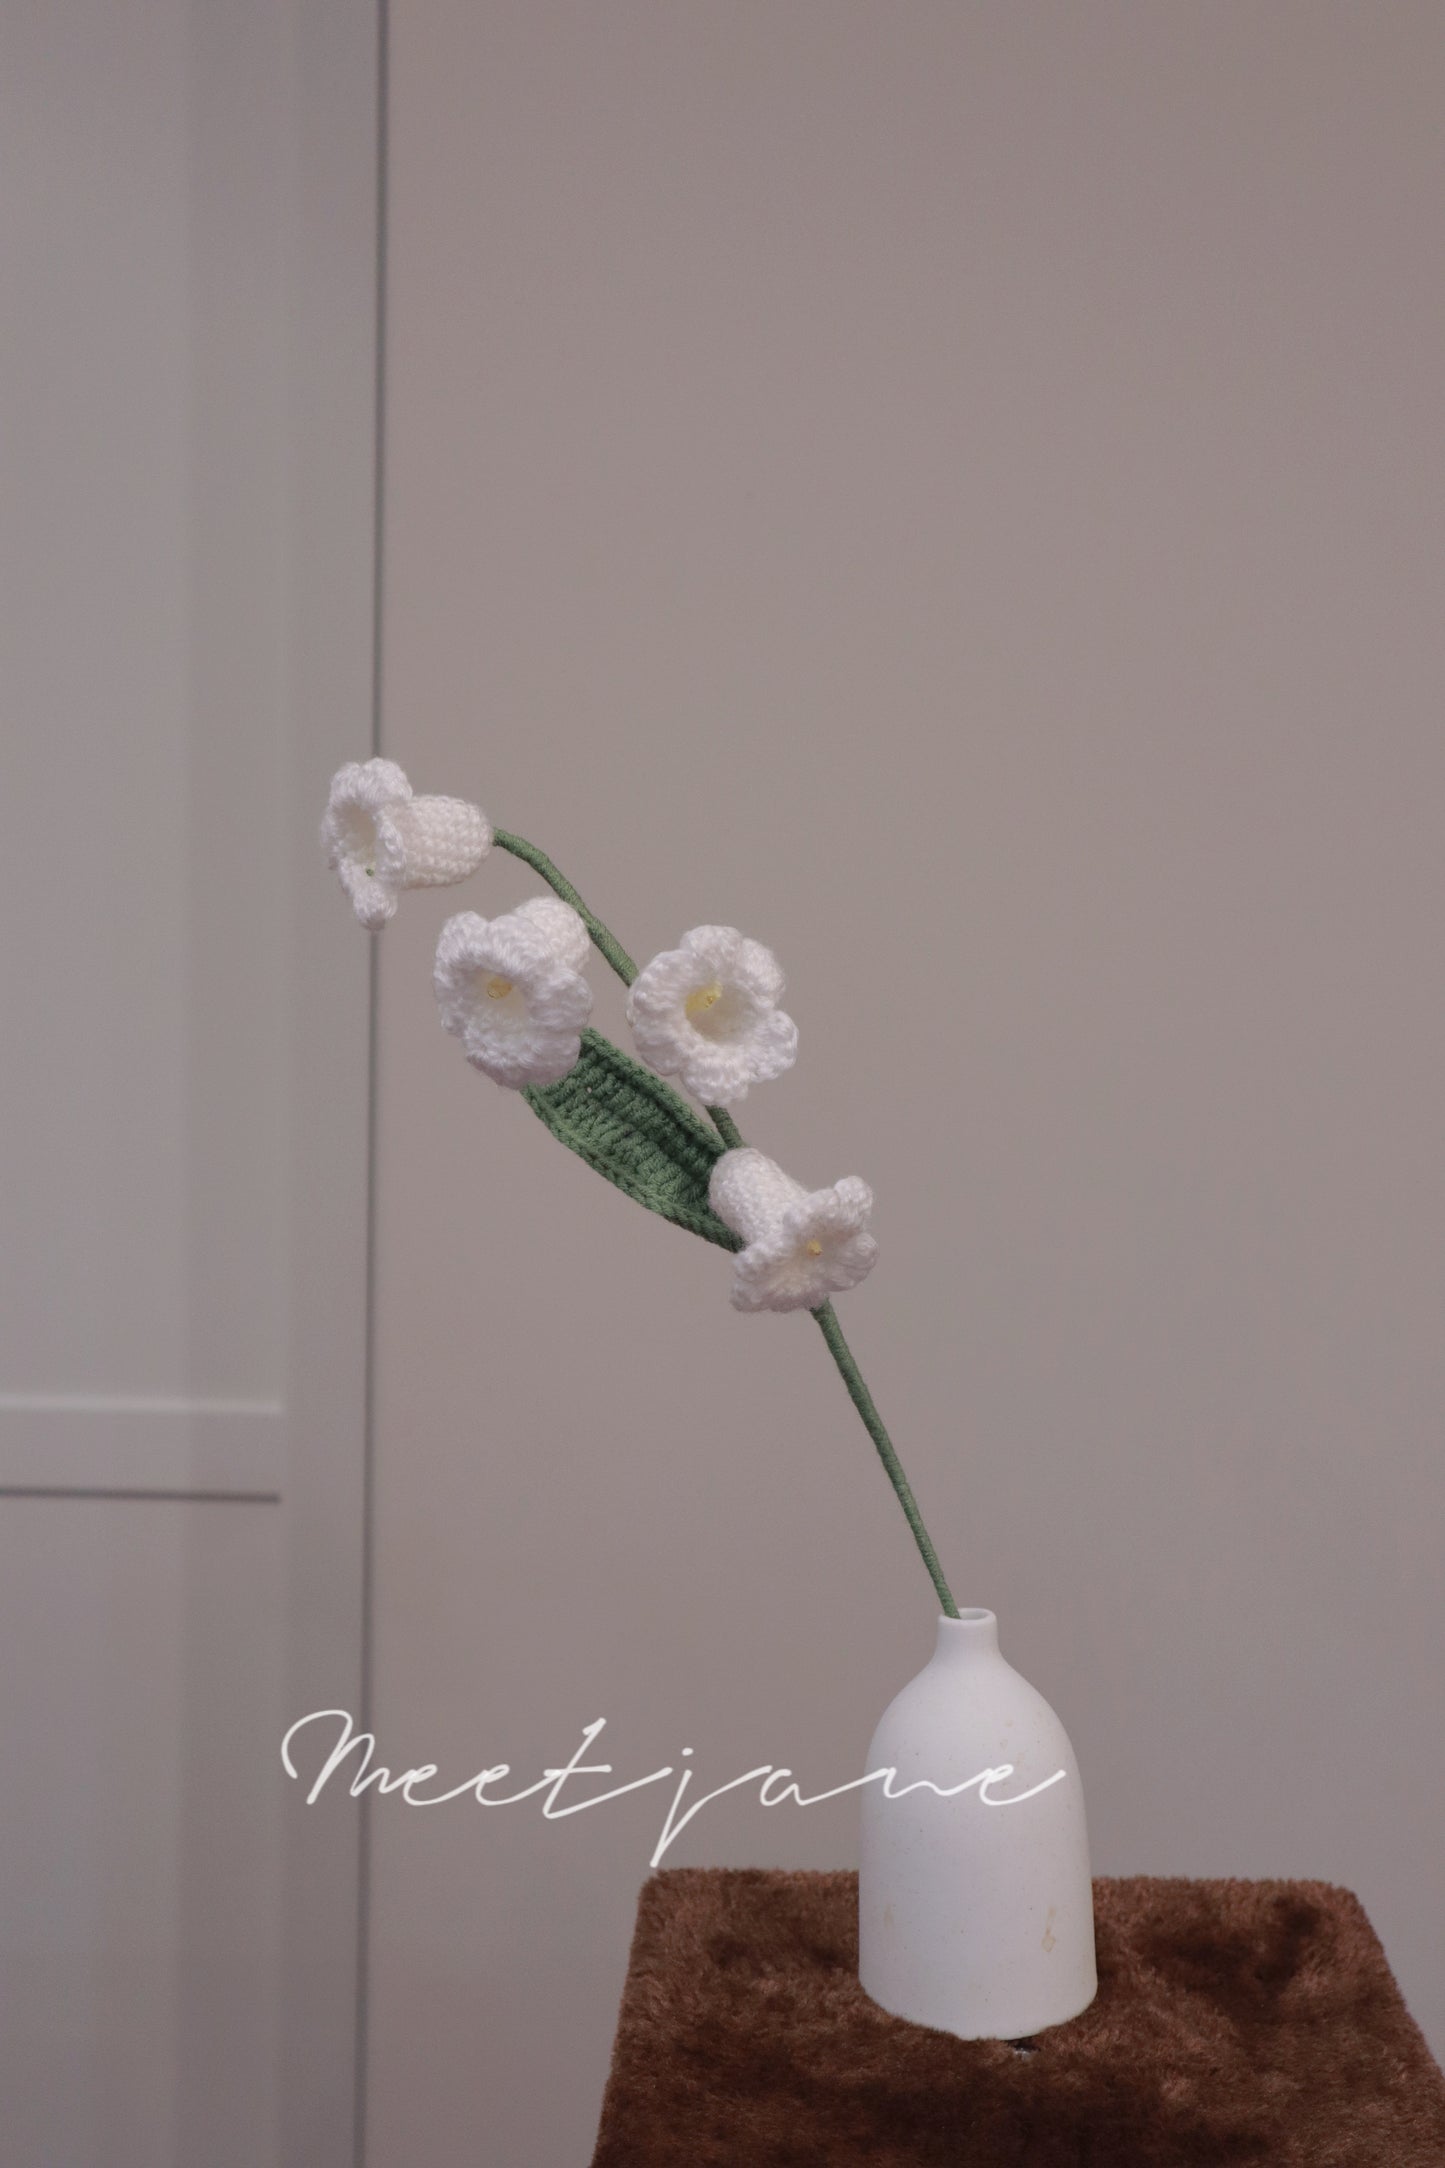 Meetjane bouquet|Melbourne handmade |Lily of the valley